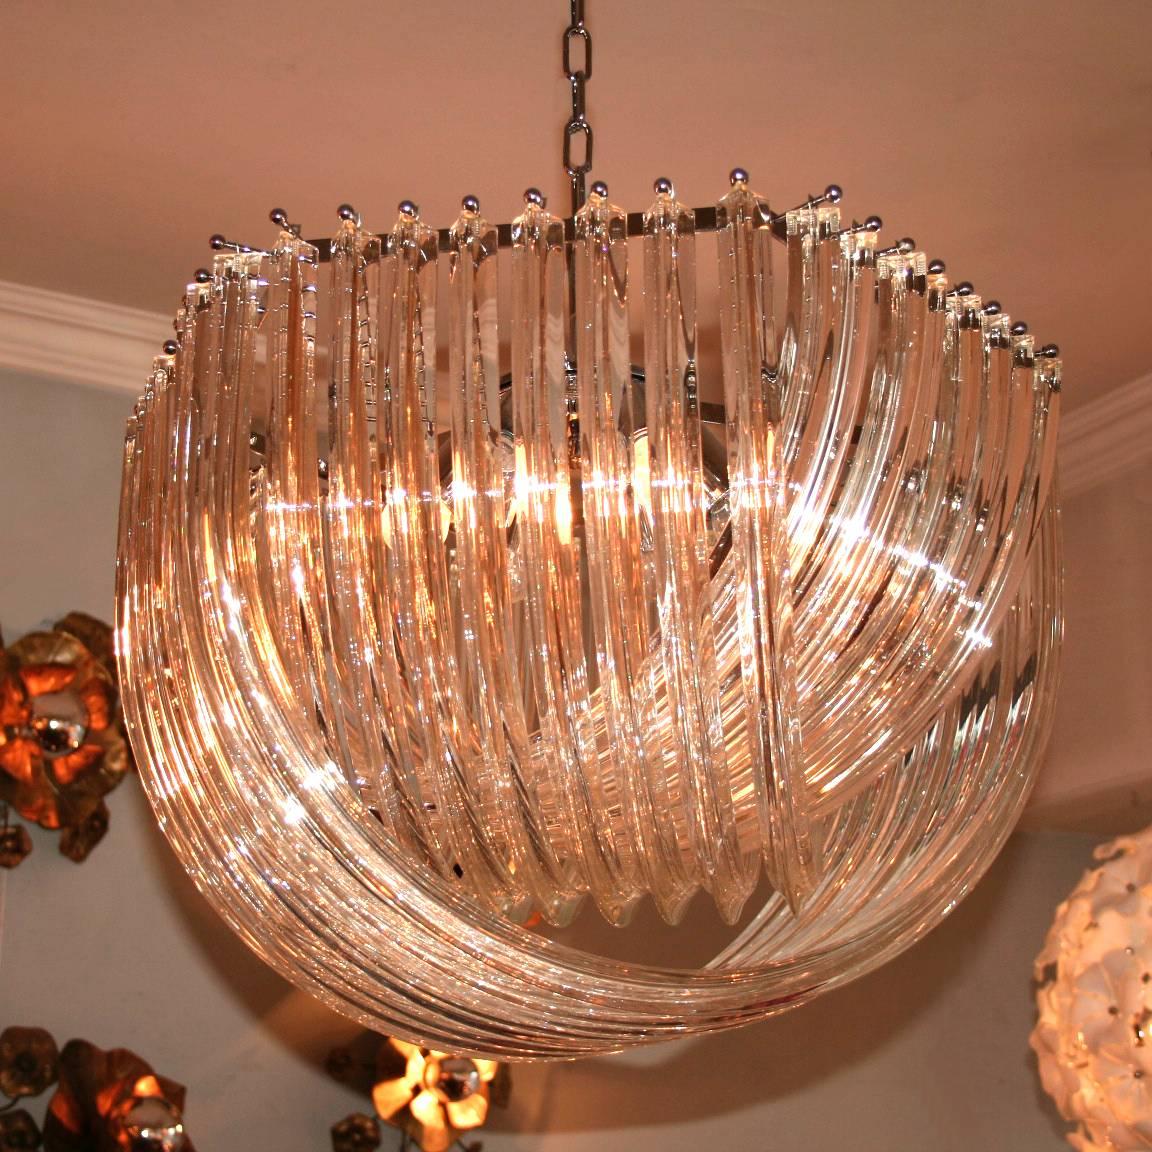 Italian Hommage to Deco: Contemporary 'Curve' Chandelier